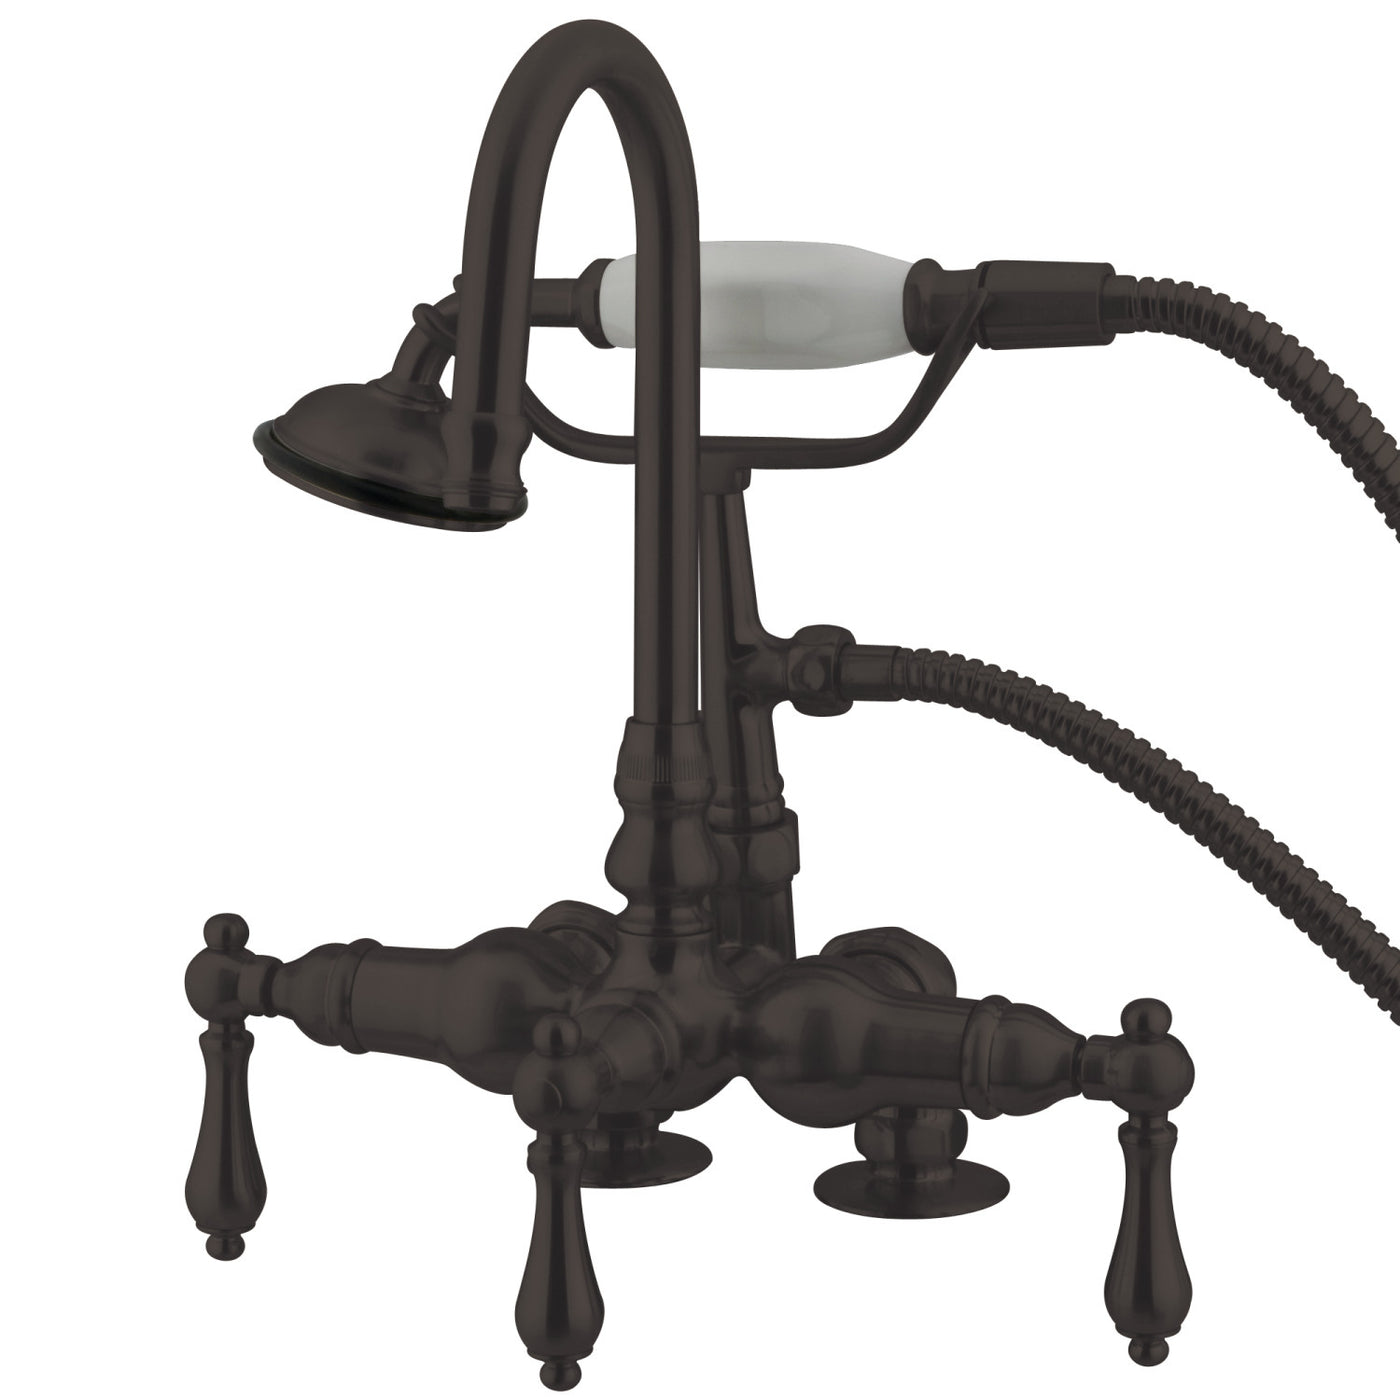 Elements of Design DT0135AL 3-3/8-Inch Deck Mount Tub Faucet with Hand Shower, Oil Rubbed Bronze